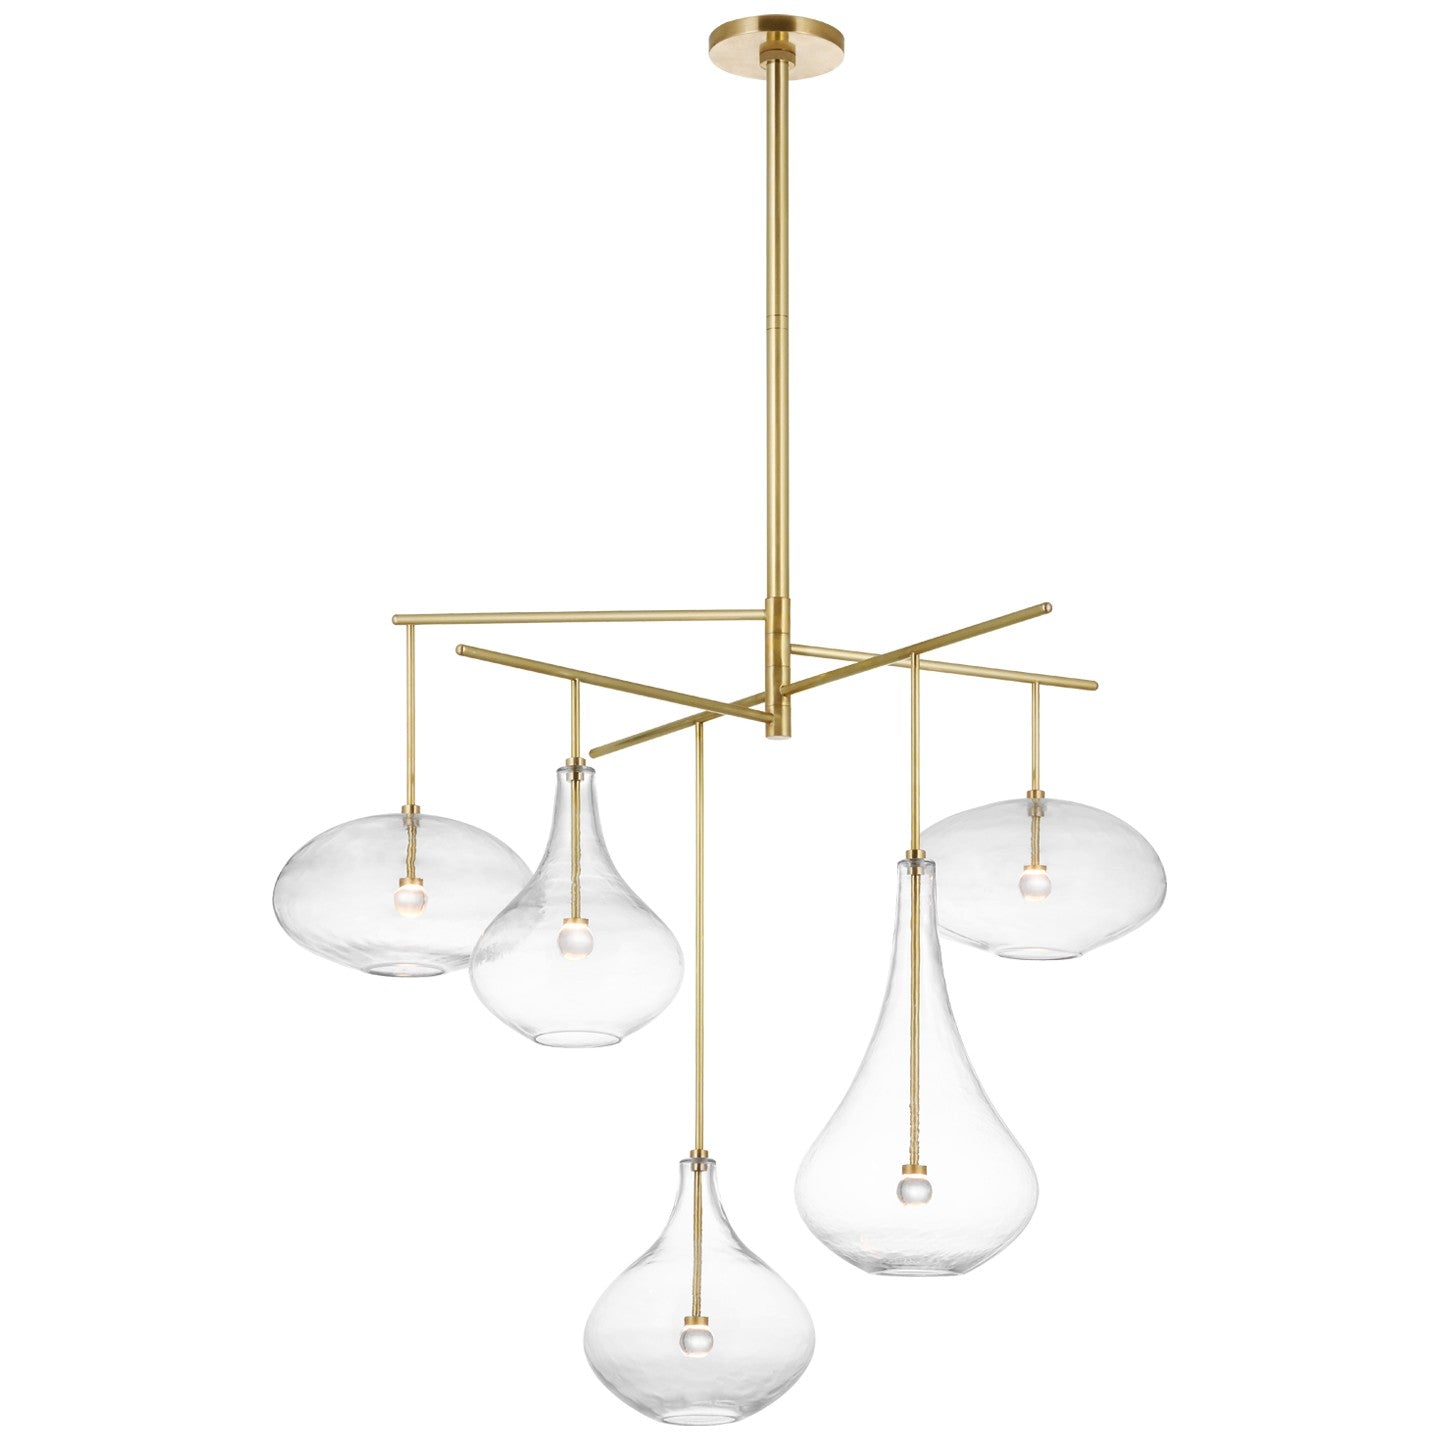 Load image into Gallery viewer, Visual Comfort Signature - CD 5025SB-CG - LED Chandelier - Lomme - Soft Brass
